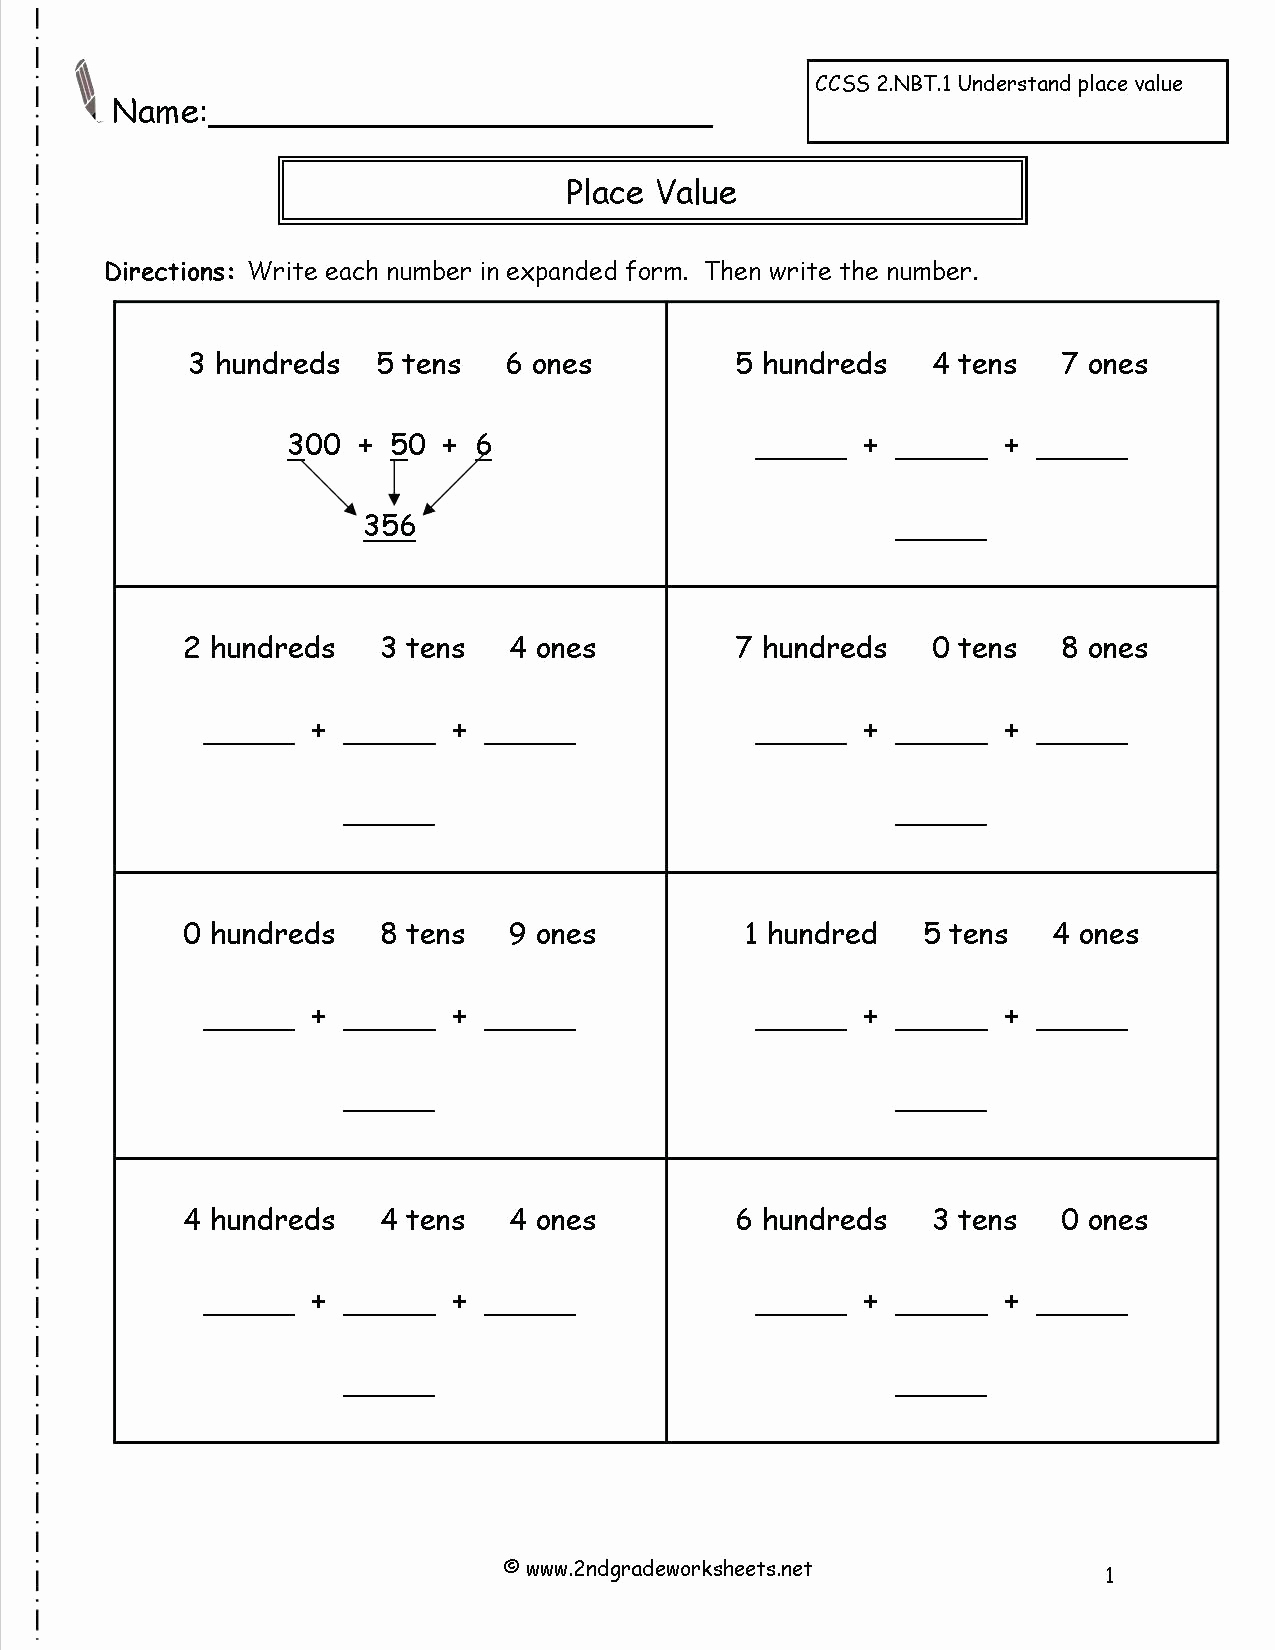 Place Value Worksheet 3rd Grade Fresh Place Value Worksheets 3rd Grade to Printable Place Value